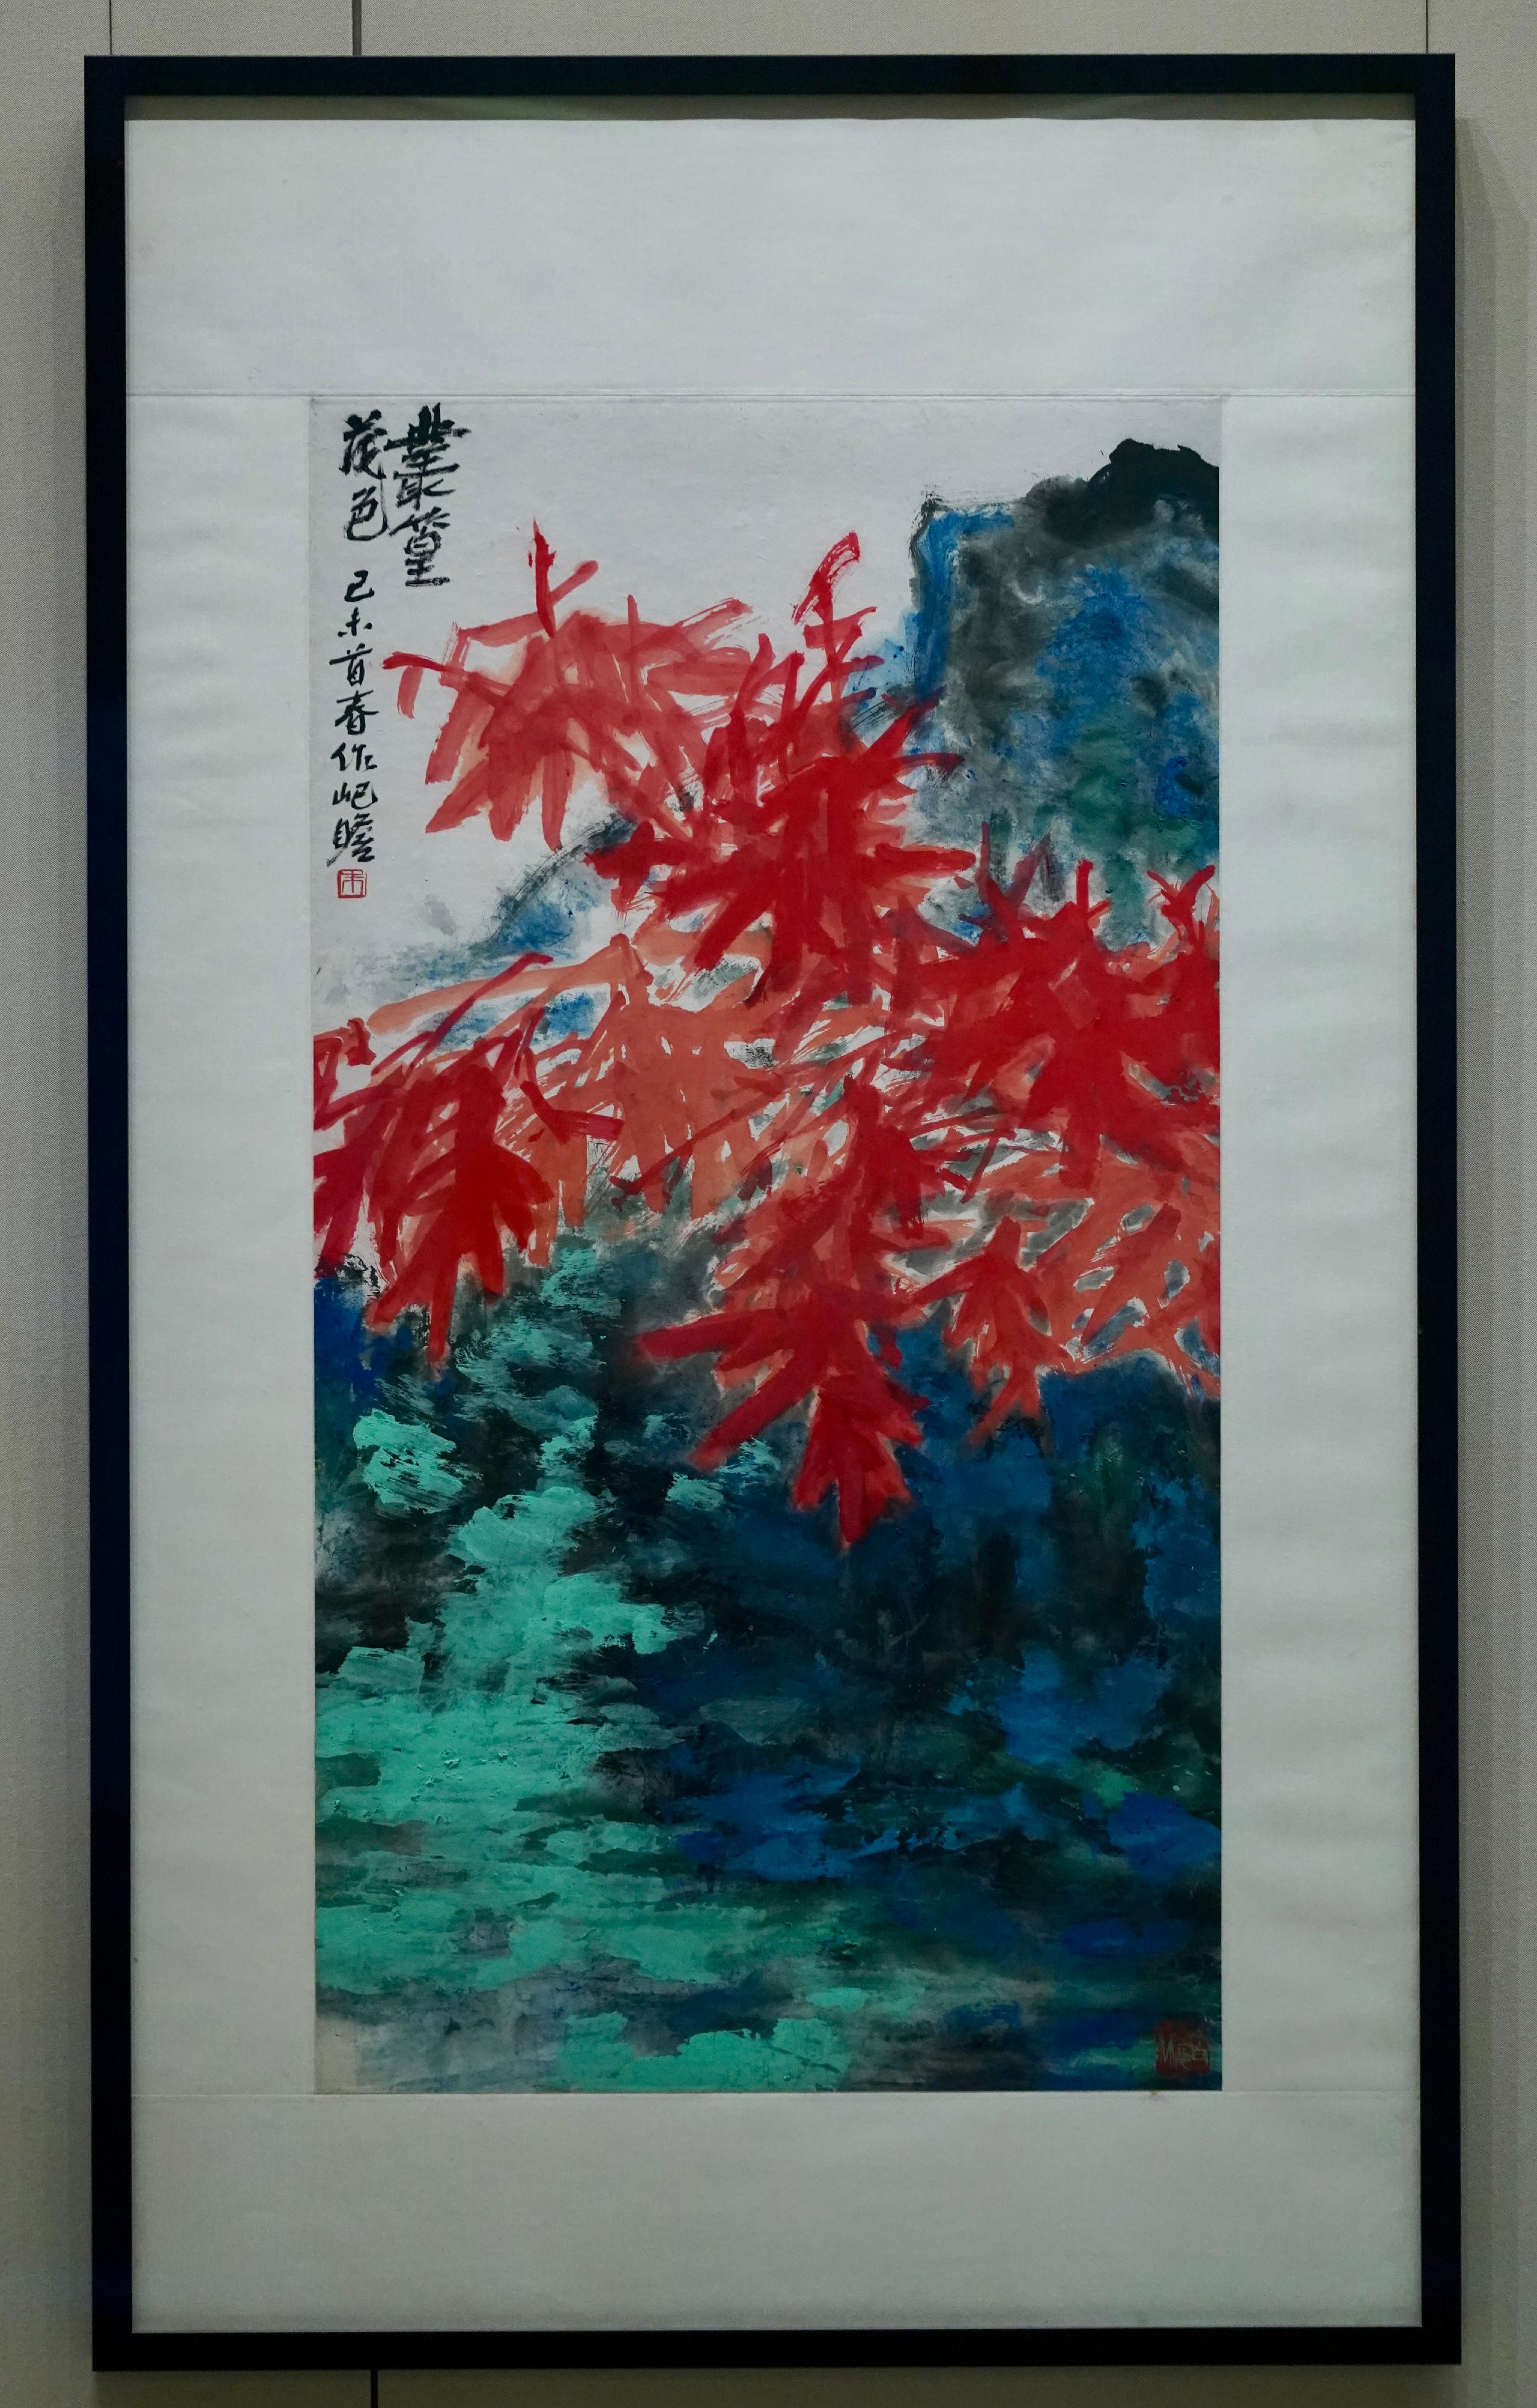 The Hong Kong Museum of Art will launch a new exhibition "Palette of a Centenarian: Selected Works of Zhu Qizhan from the Jingguanlou Collection", to showcase over 80 sets of paintings by Shanghai School Master Zhu Qizhan from different times in his life. Photo shows "Red bamboo".